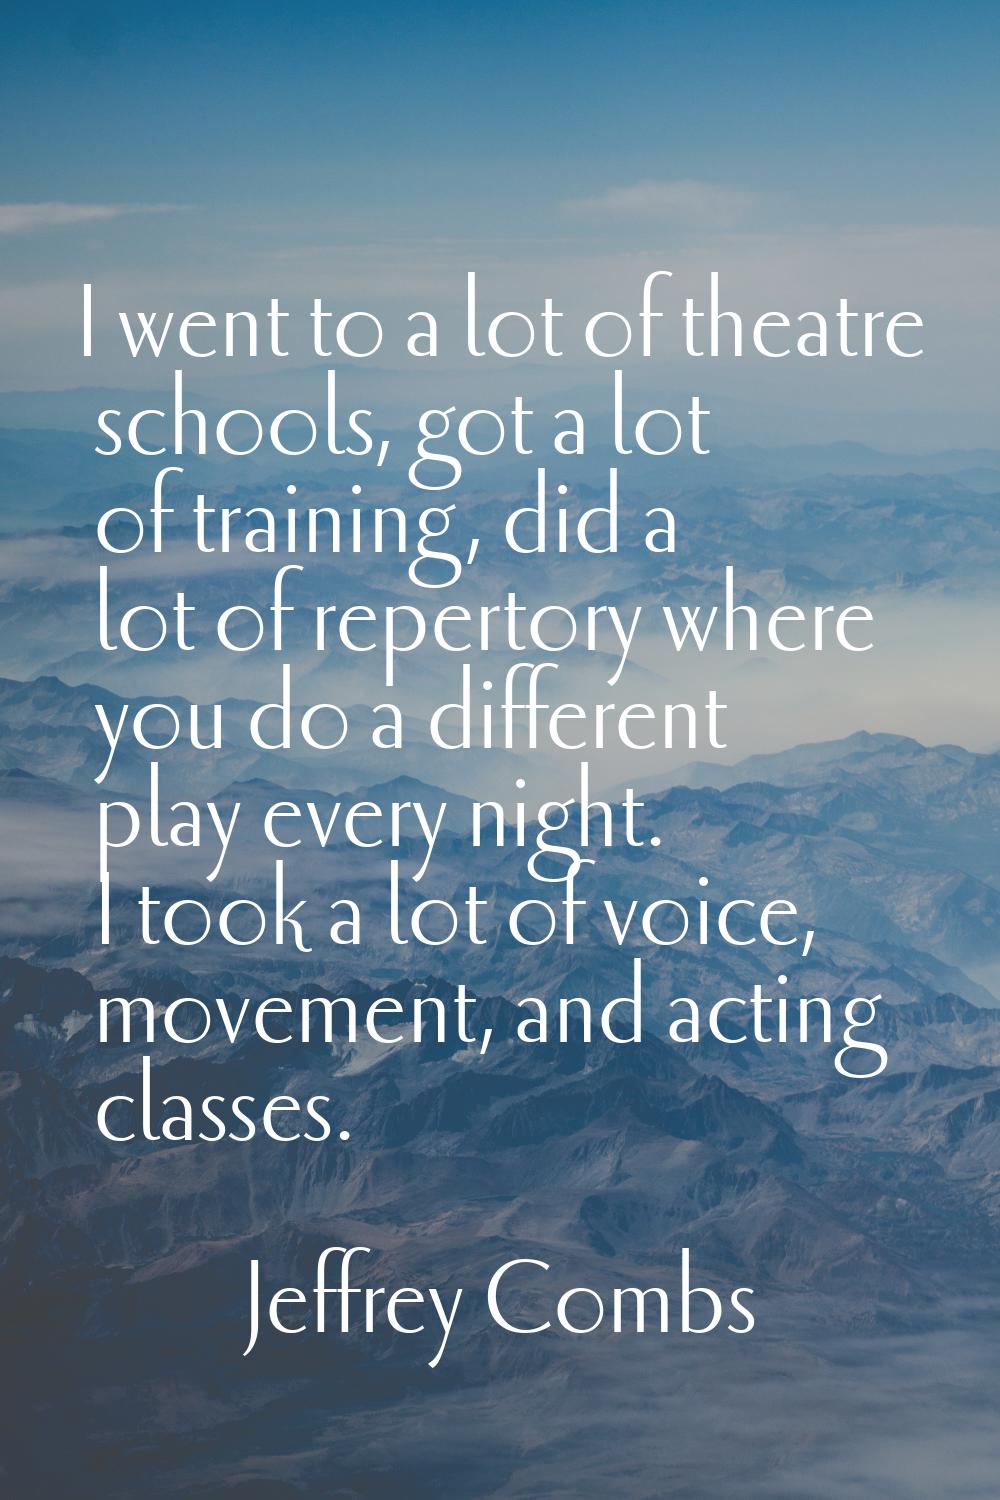 I went to a lot of theatre schools, got a lot of training, did a lot of repertory where you do a di